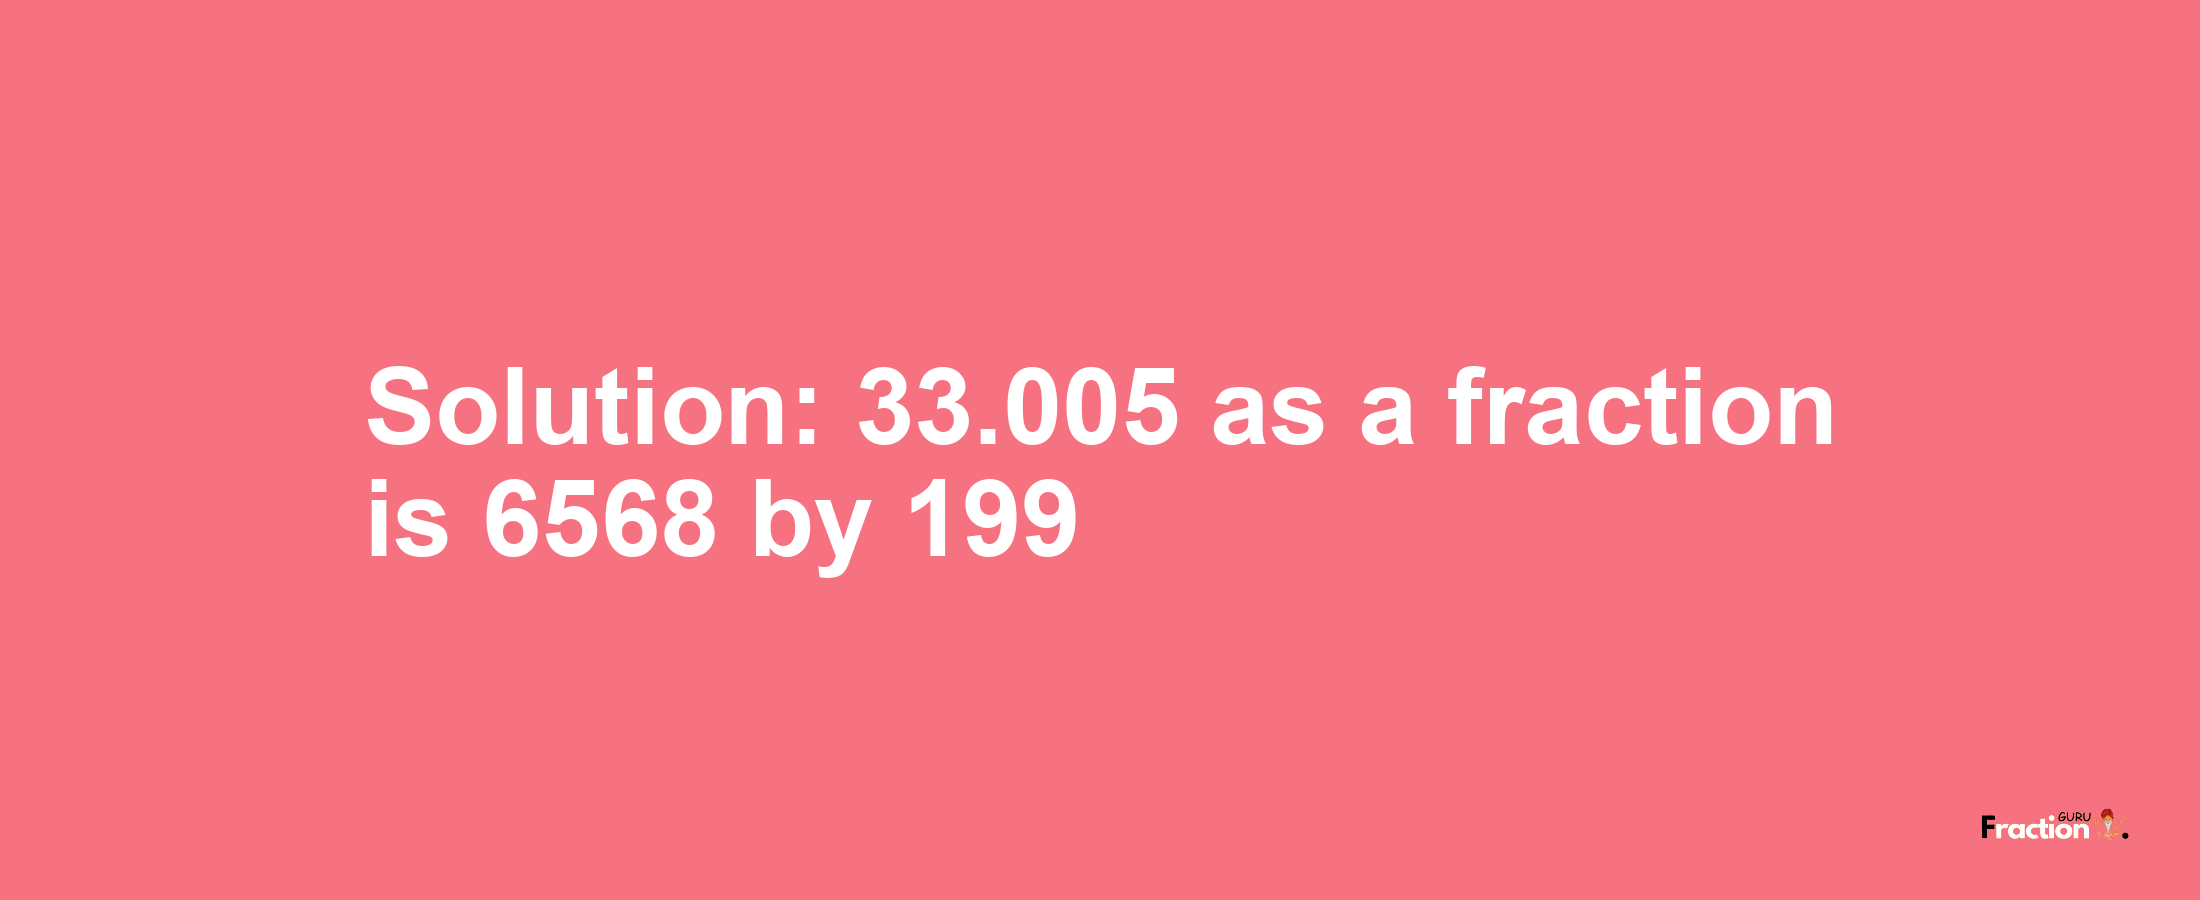 Solution:33.005 as a fraction is 6568/199